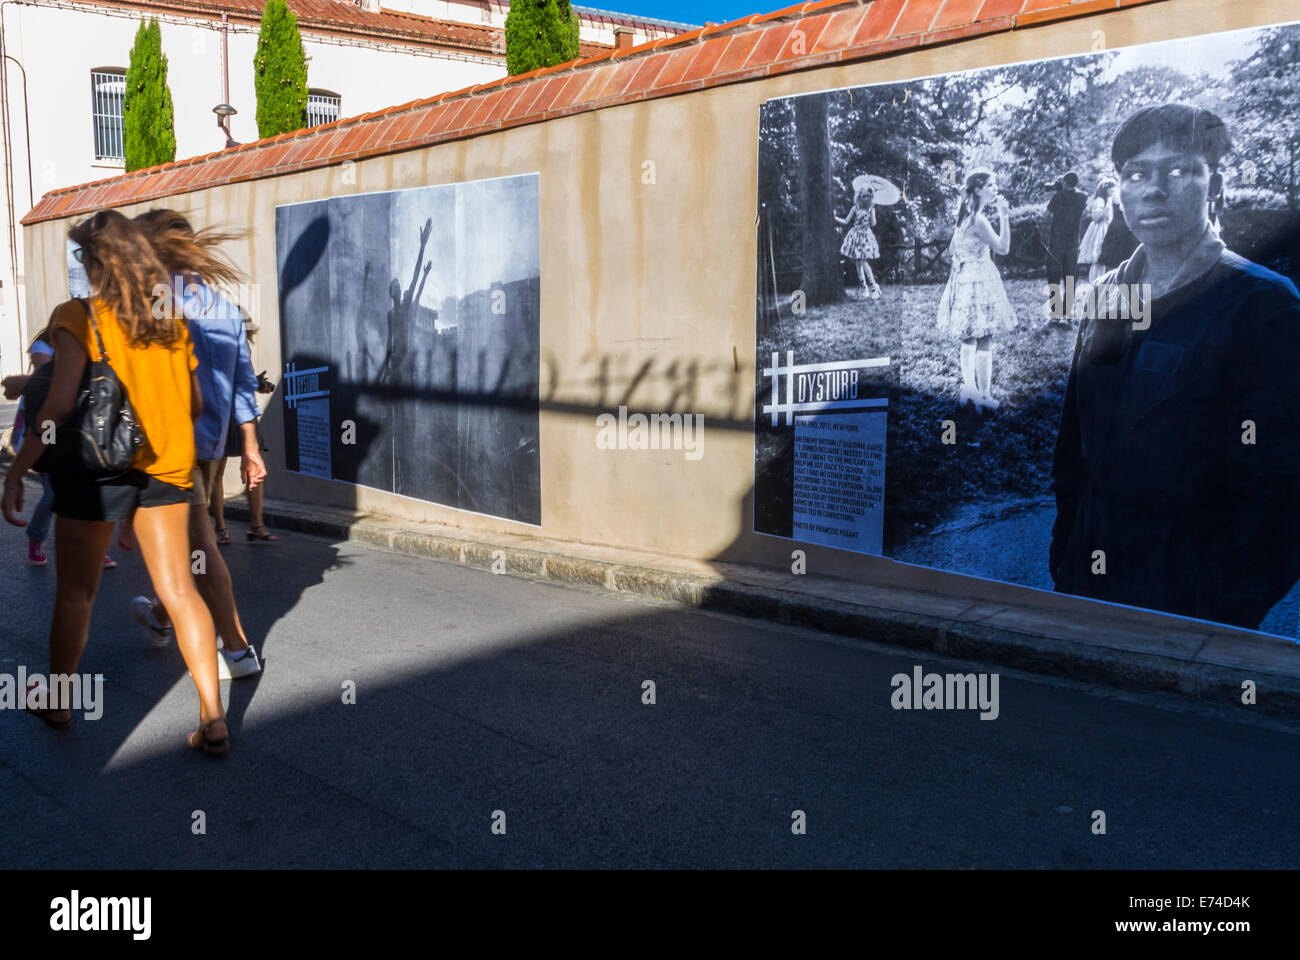 Perpignan, France, Tourists Visiting in 'Visa Pour l'Image' Photojournalism Festival Photography Gallery Exhibition, Outdoor on City Walls Stock Photo